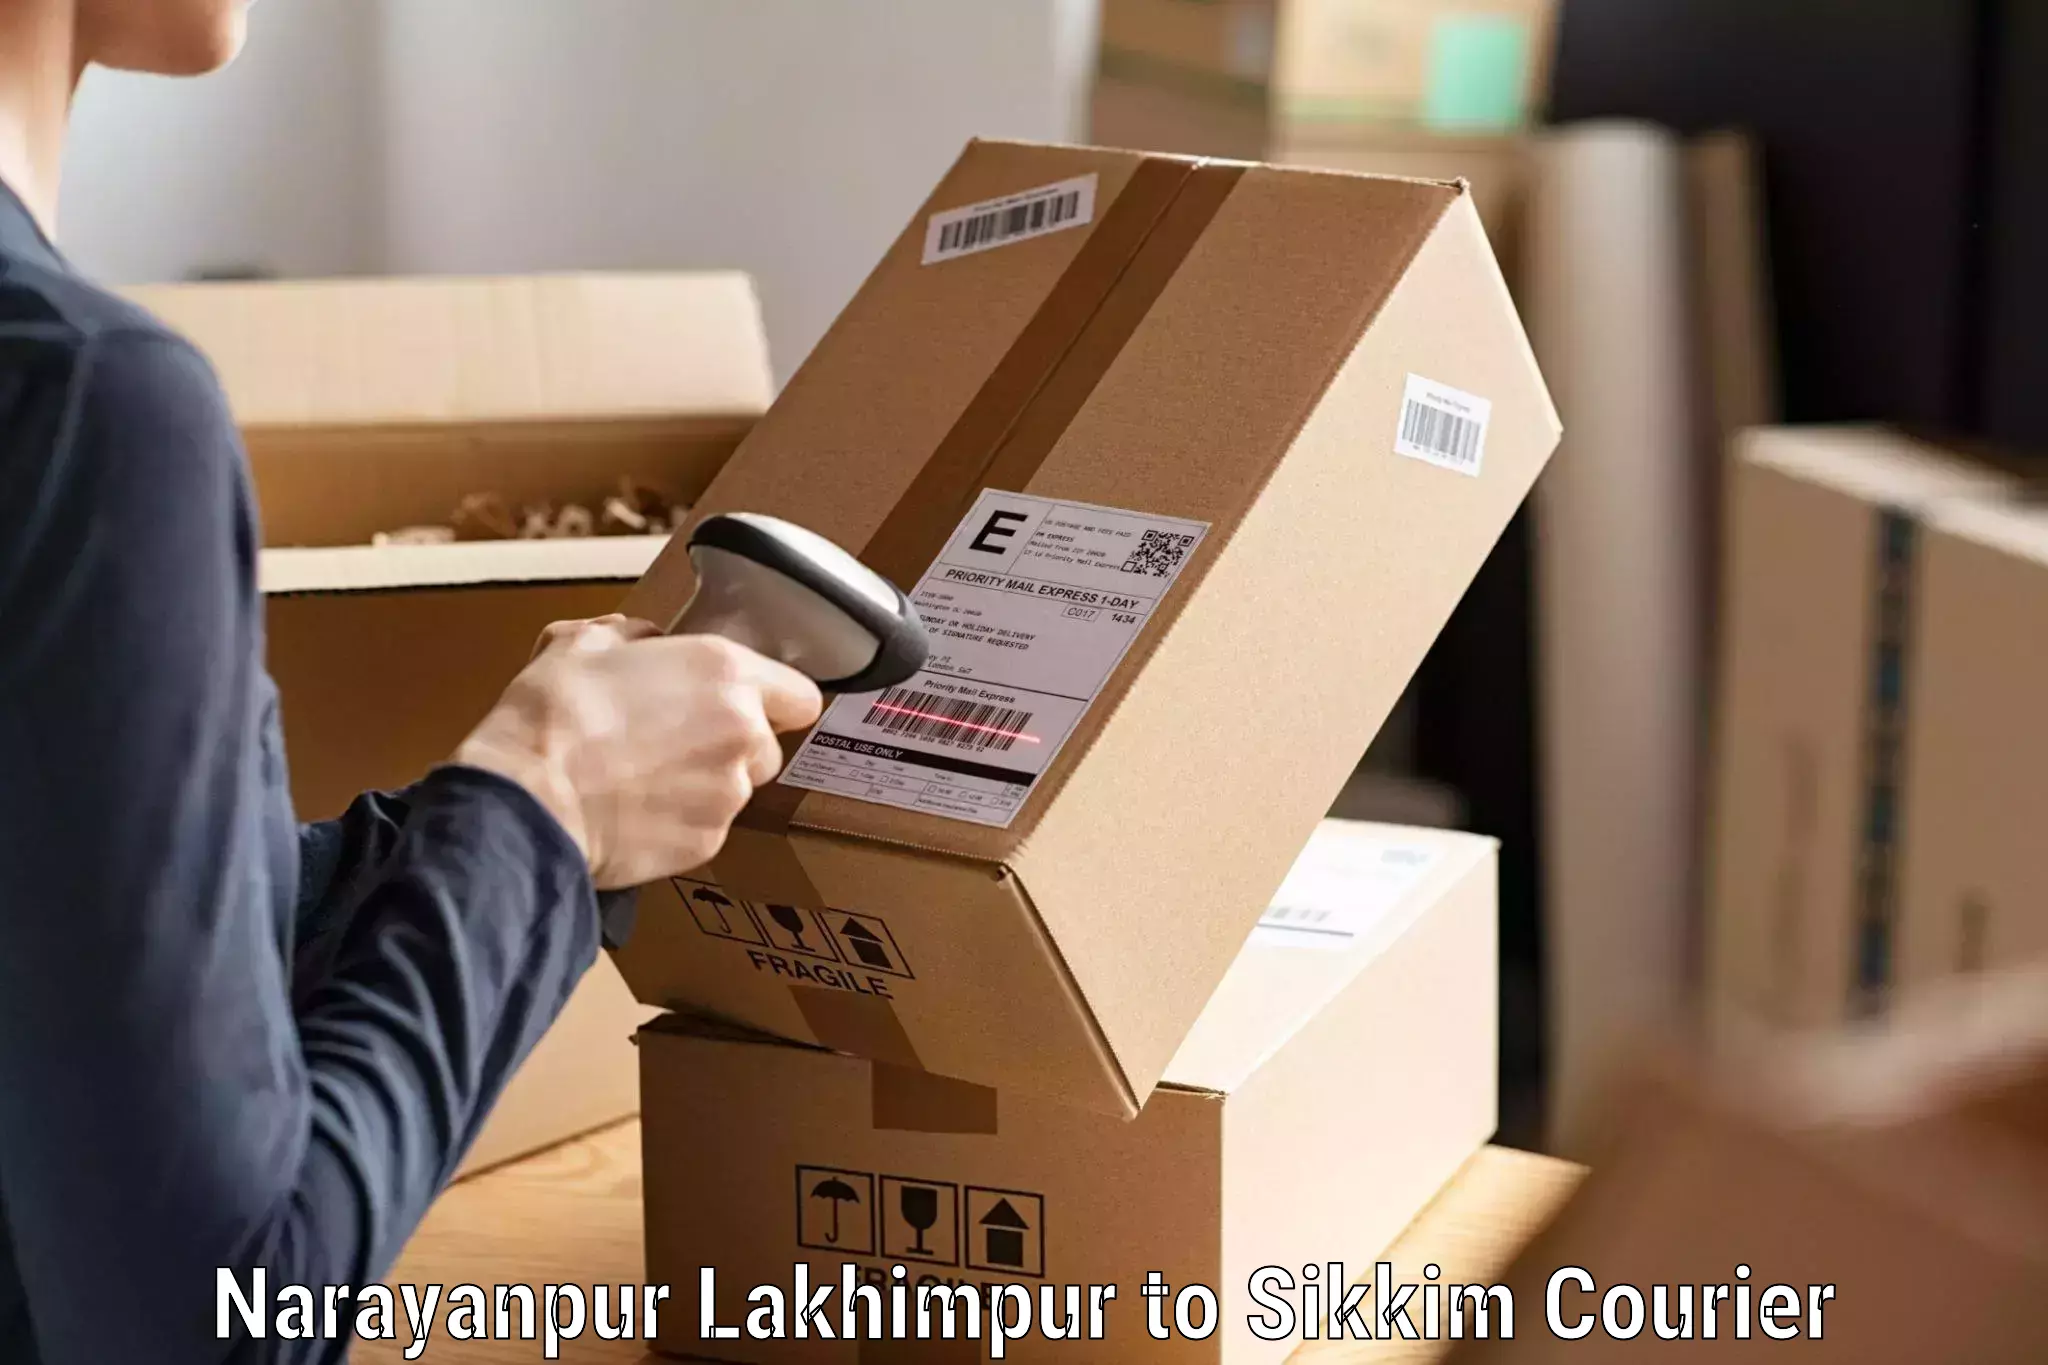 Comprehensive delivery network Narayanpur Lakhimpur to Pelling